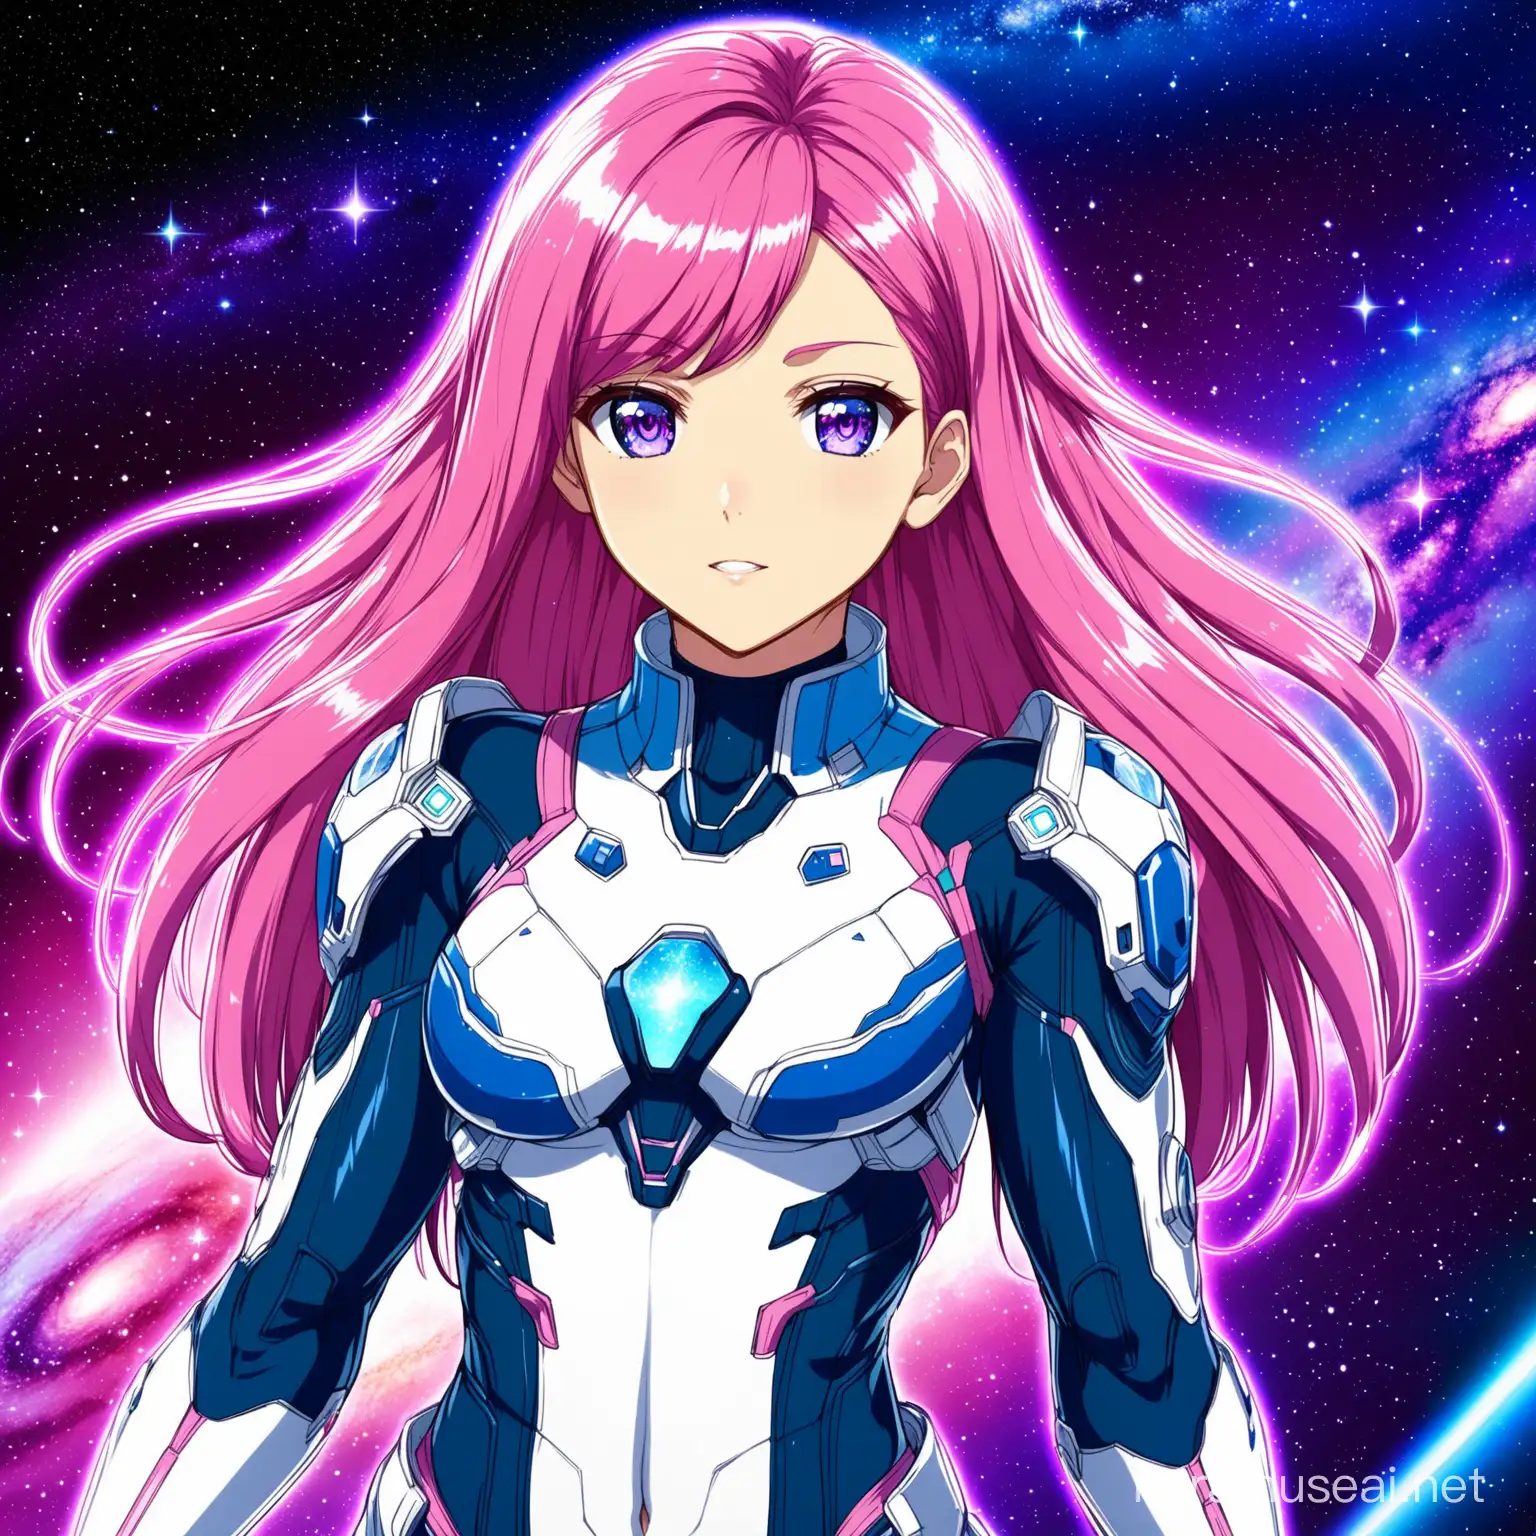 humanisation of Galaxy Andromeda, anime style